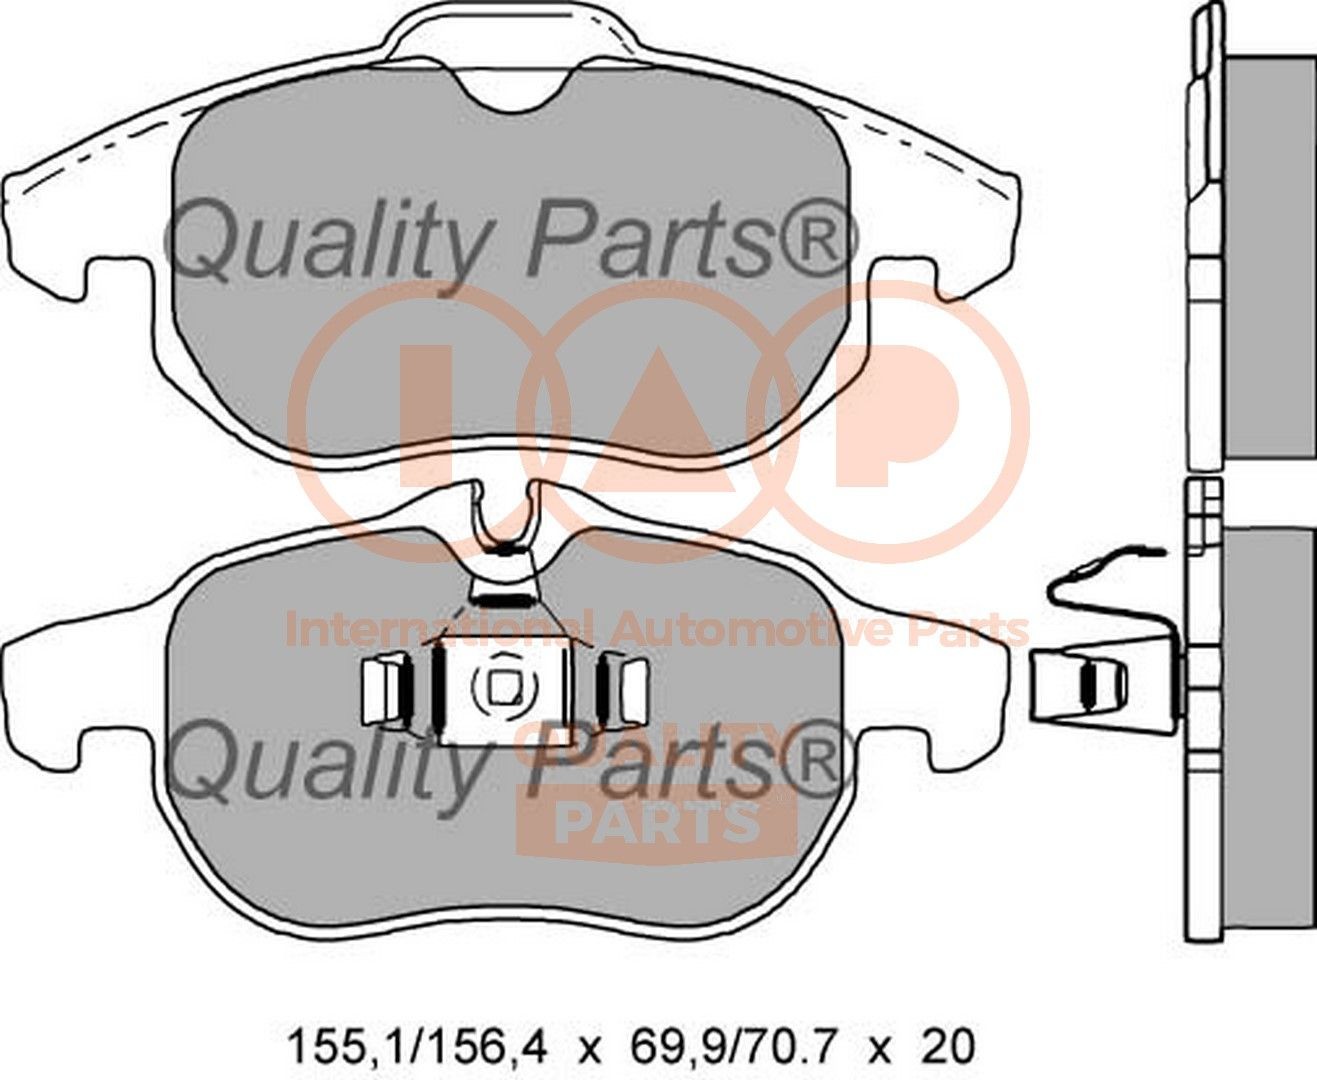 IAP QUALITY PARTS Front Axle Height 1: 69,9mm, Height 2: 70,7mm, Width 1: 155mm, Width 2 [mm]: 156,1mm, Thickness 1: 20mm, Thickness 2: 20mm Brake pads 704-00054 buy